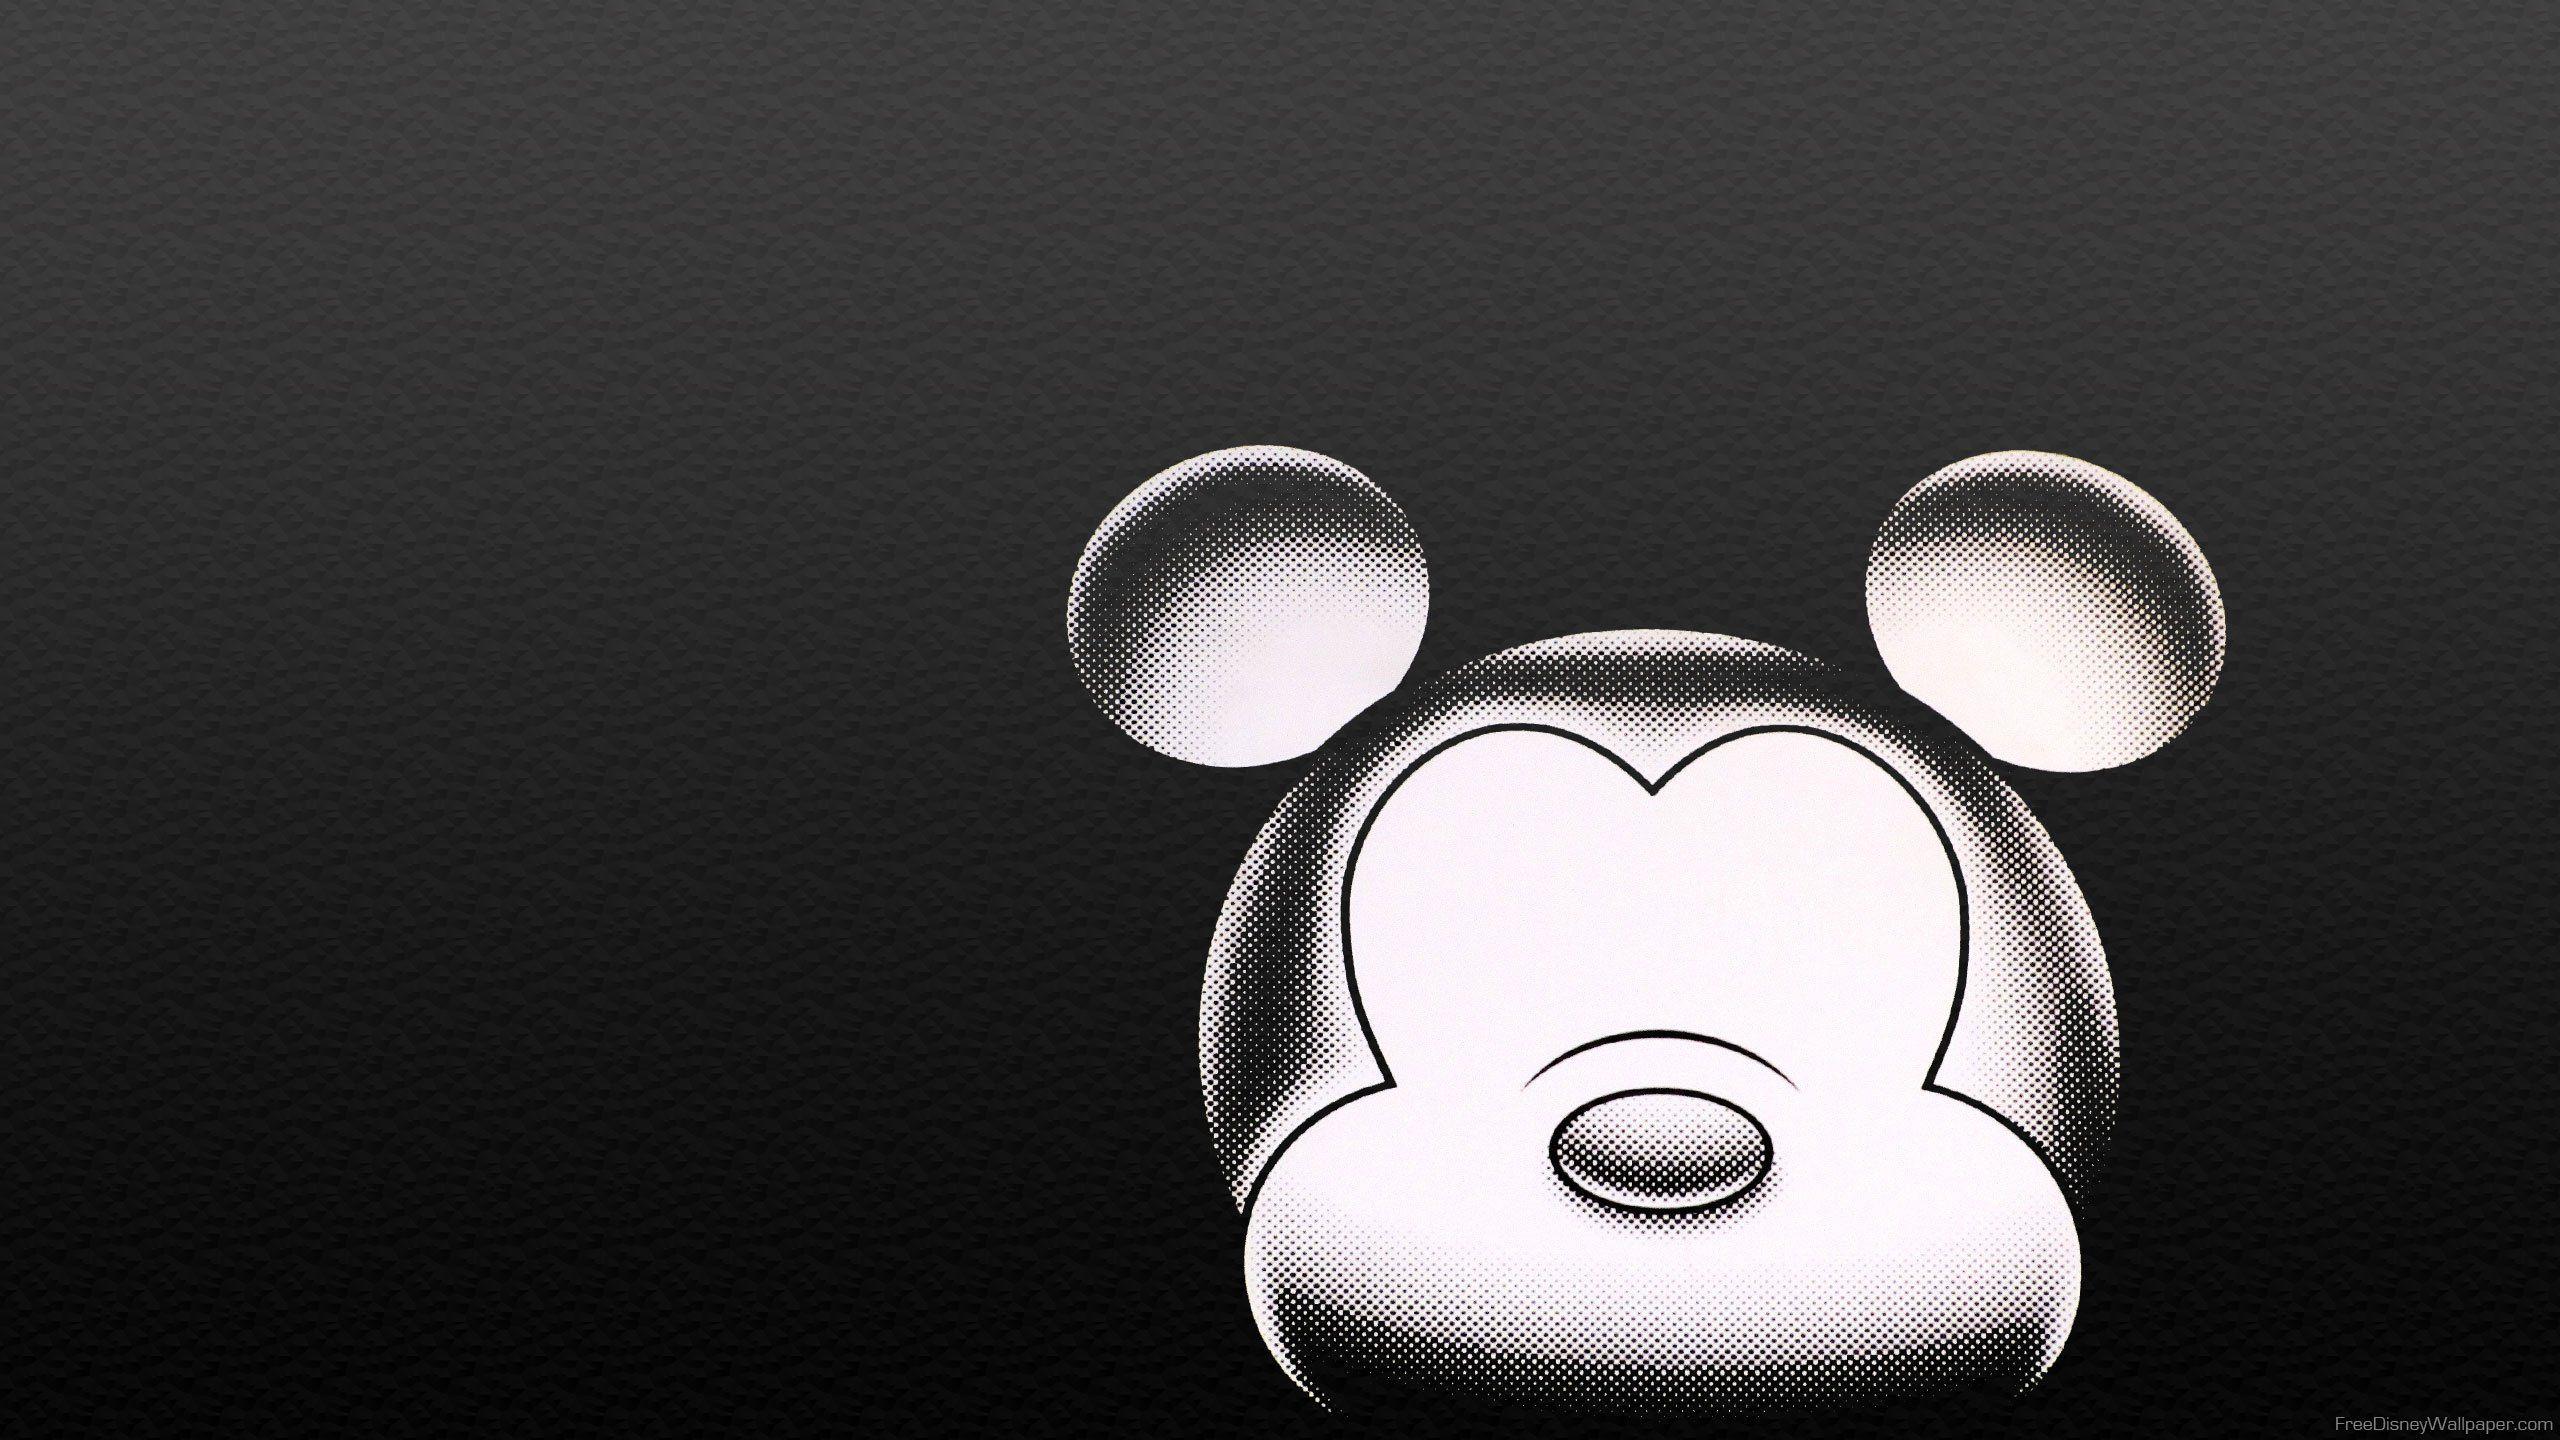 Cool Mickey Mouse 4k Wallpapers - Top Free Cool Mickey Mouse 4k